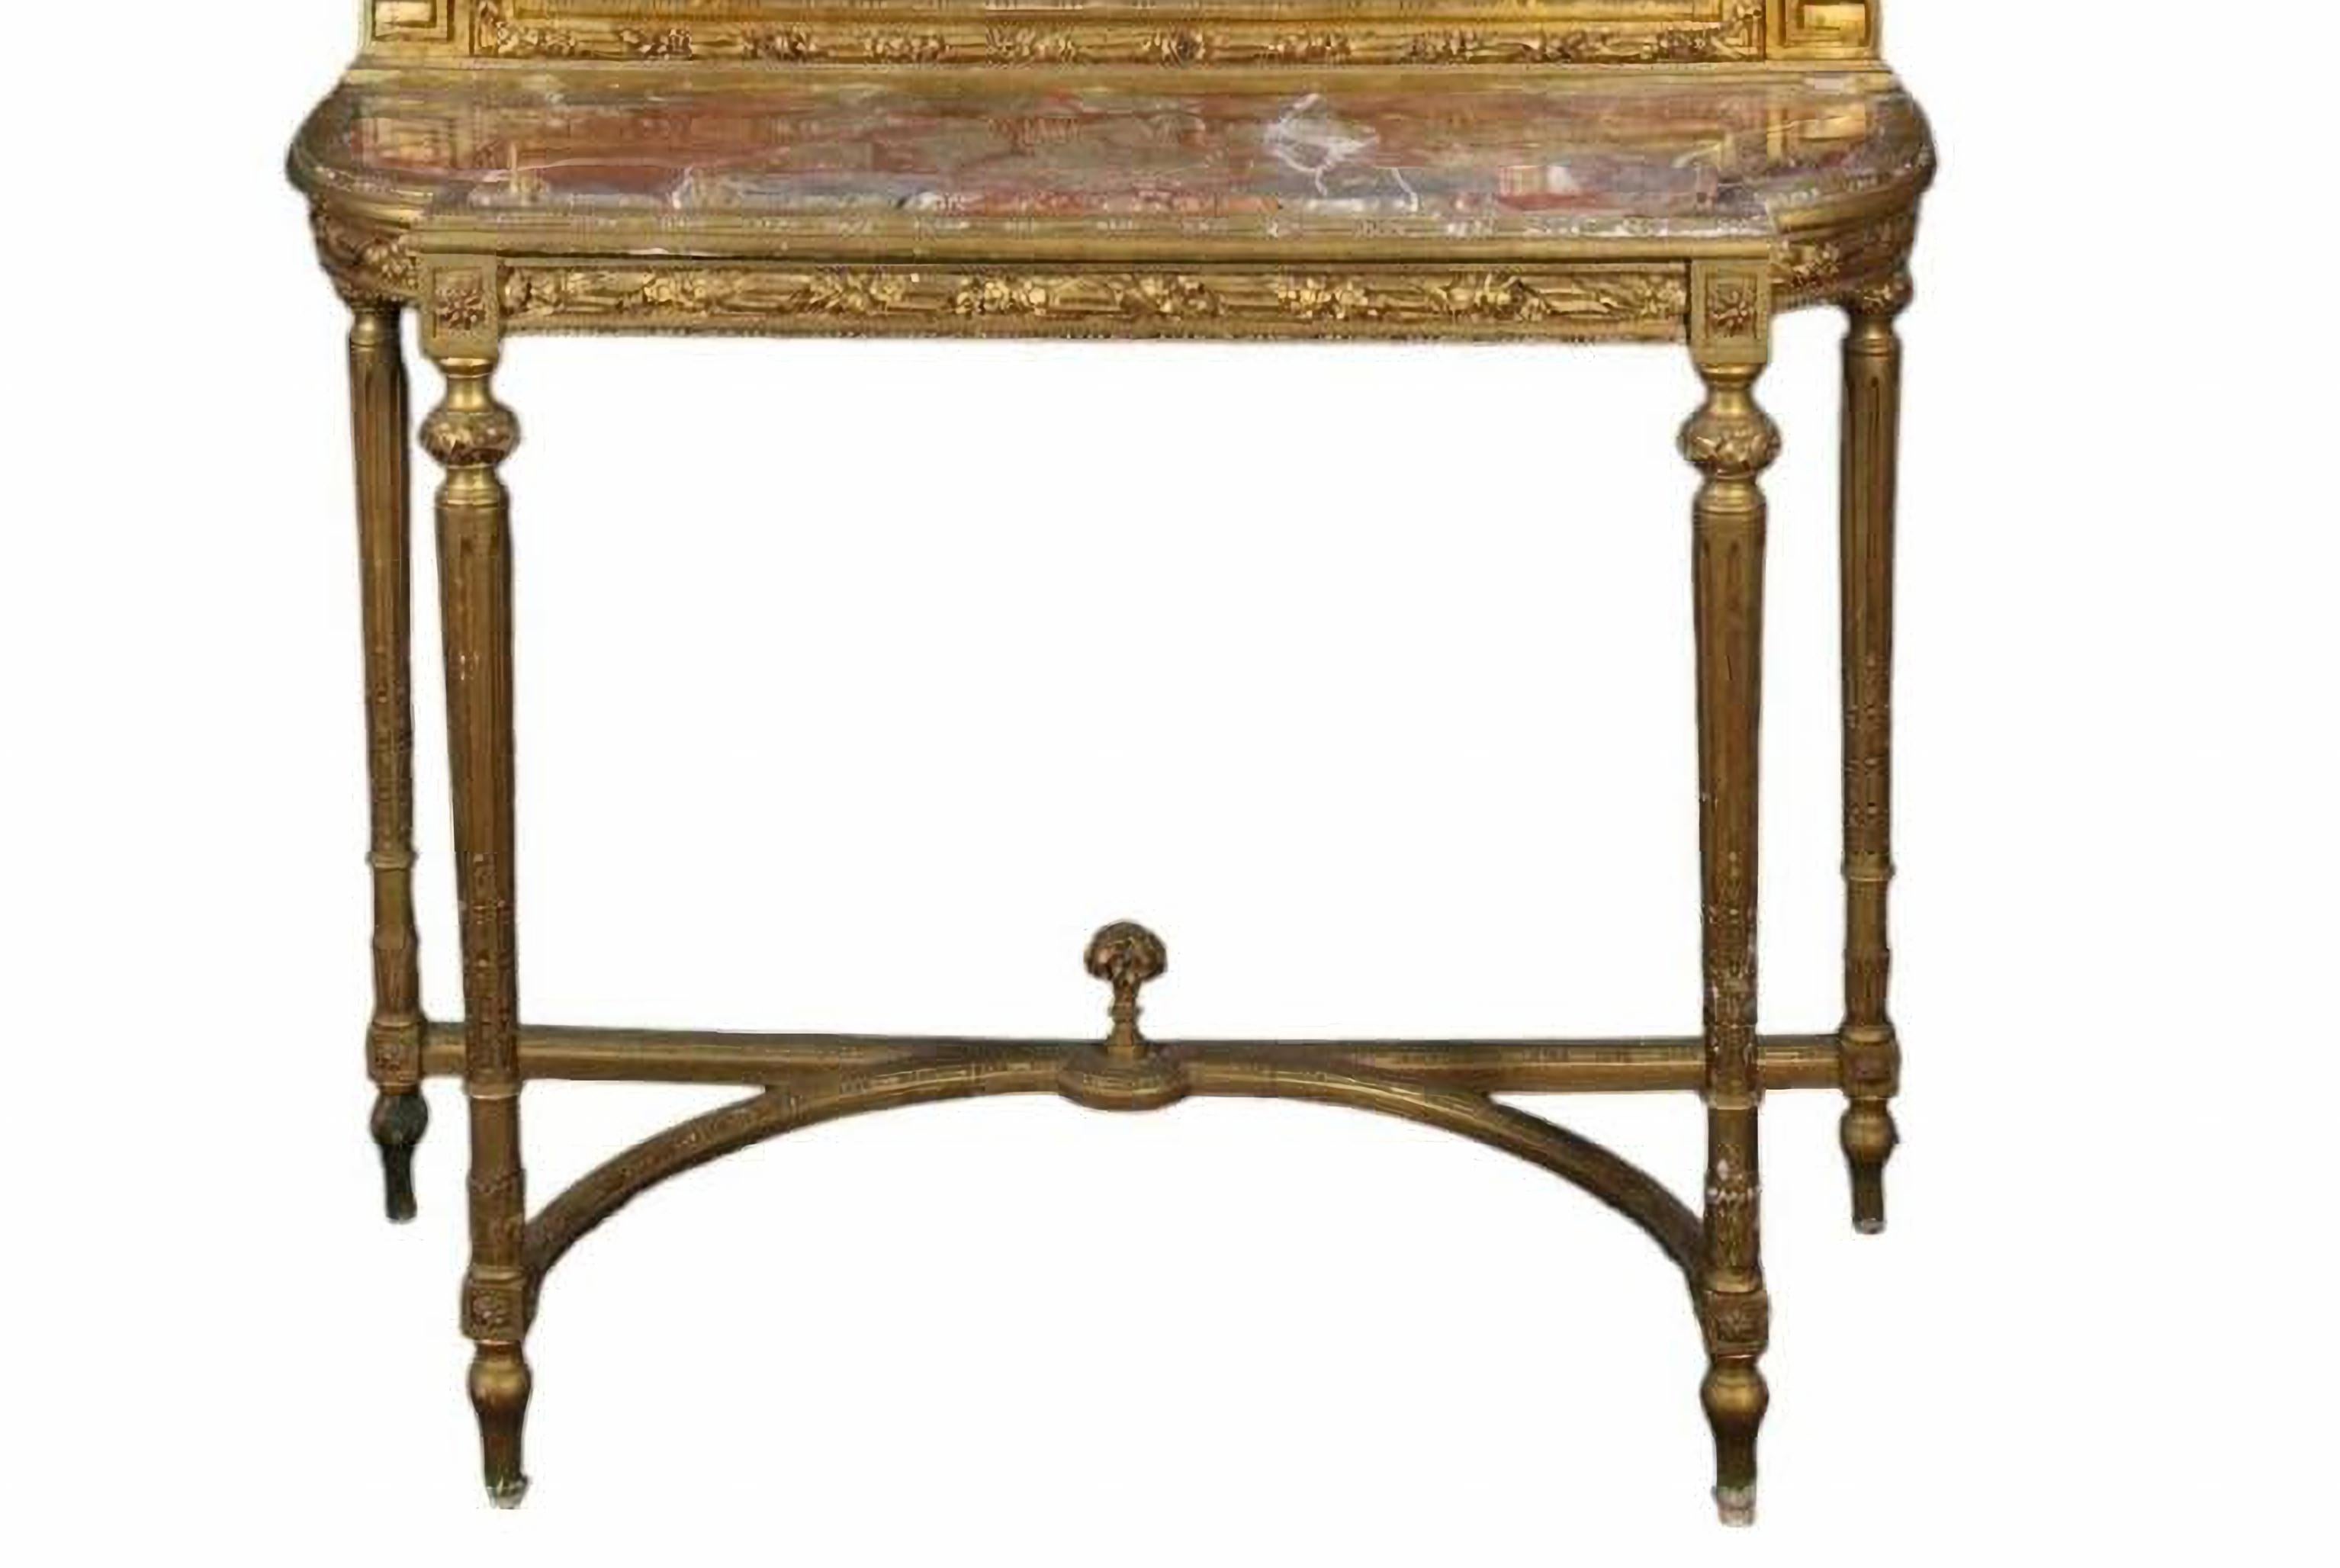 19th Century Italian CONSOLE WITH MIRROR
in carved and gilded wood, top in Sicilian jasper
Sicily 19th century
h 299 x 125 x 45 cm
original condition